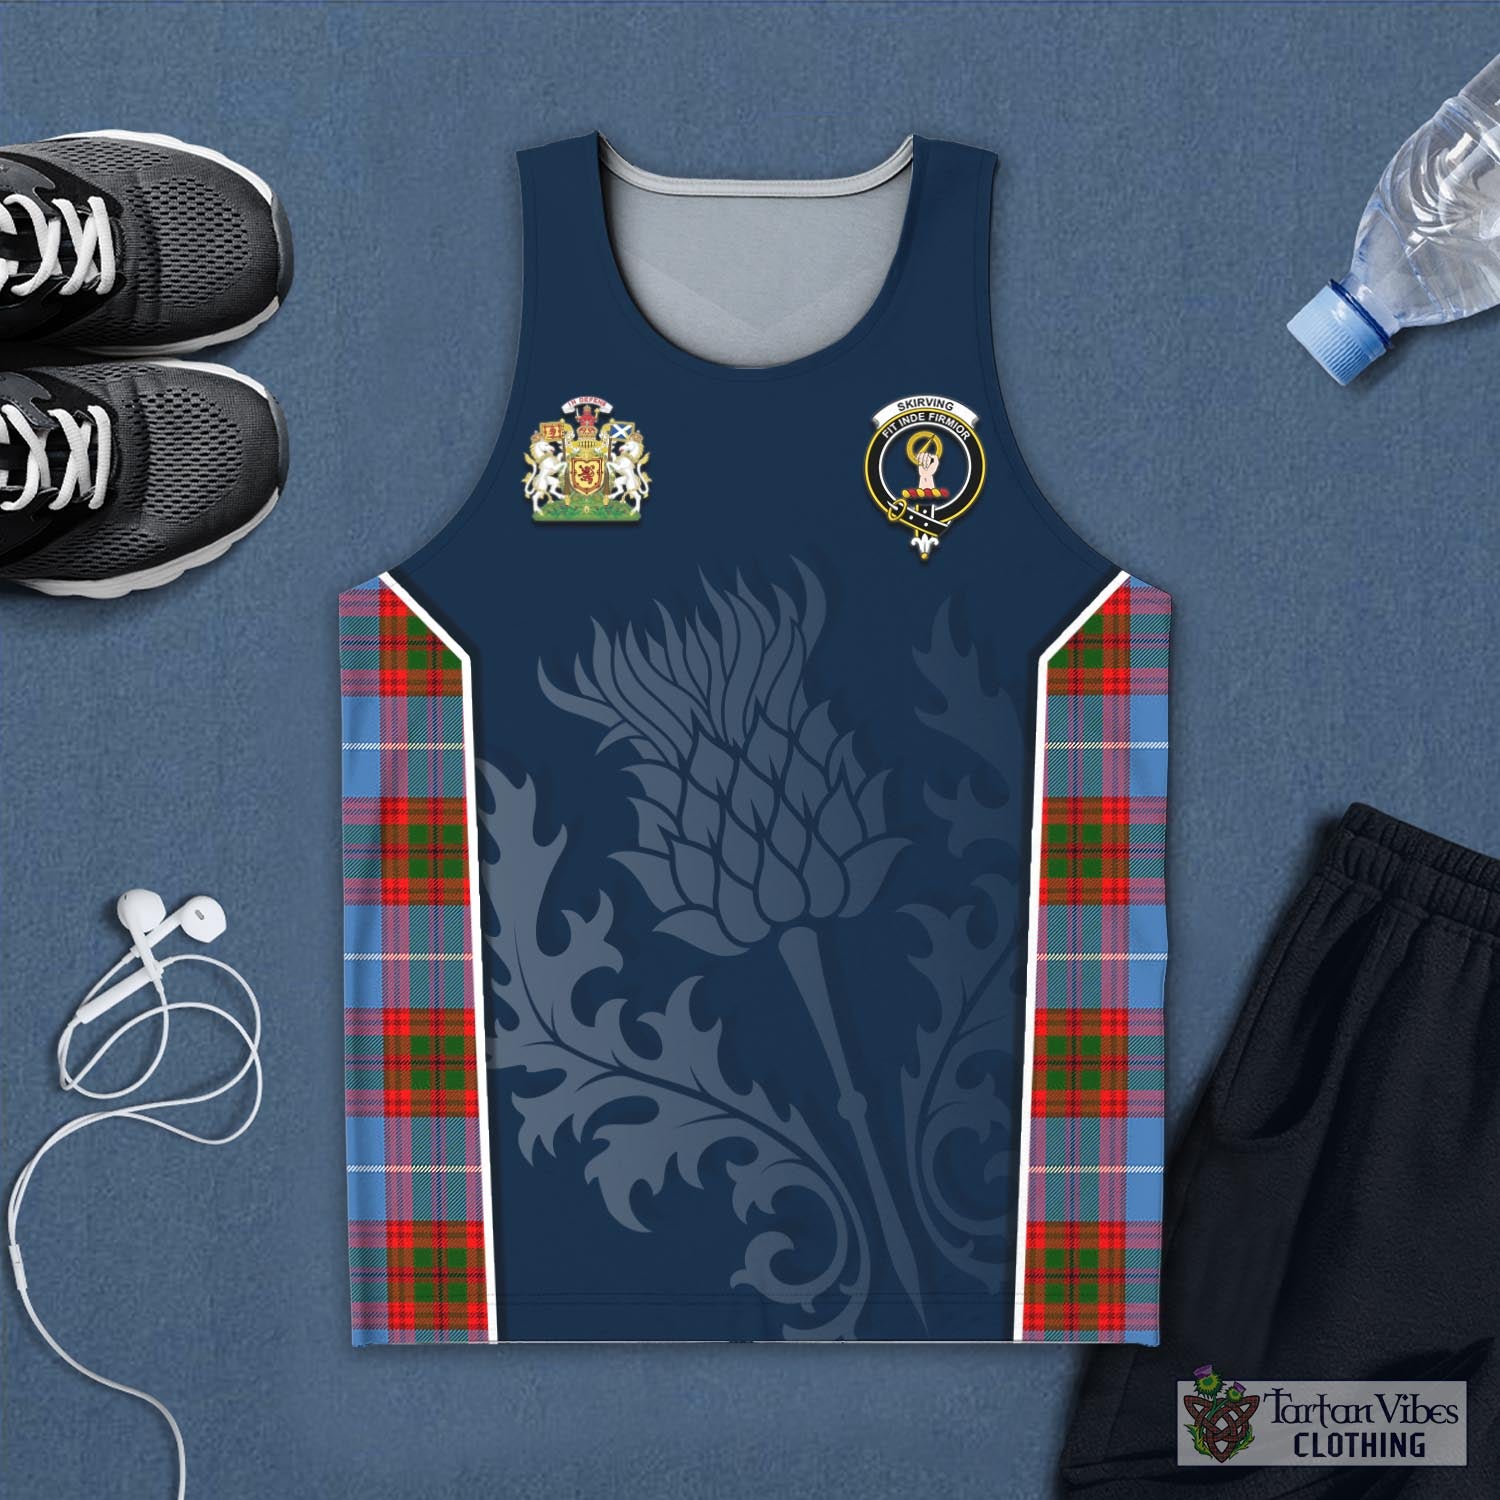 Tartan Vibes Clothing Skirving Tartan Men's Tanks Top with Family Crest and Scottish Thistle Vibes Sport Style